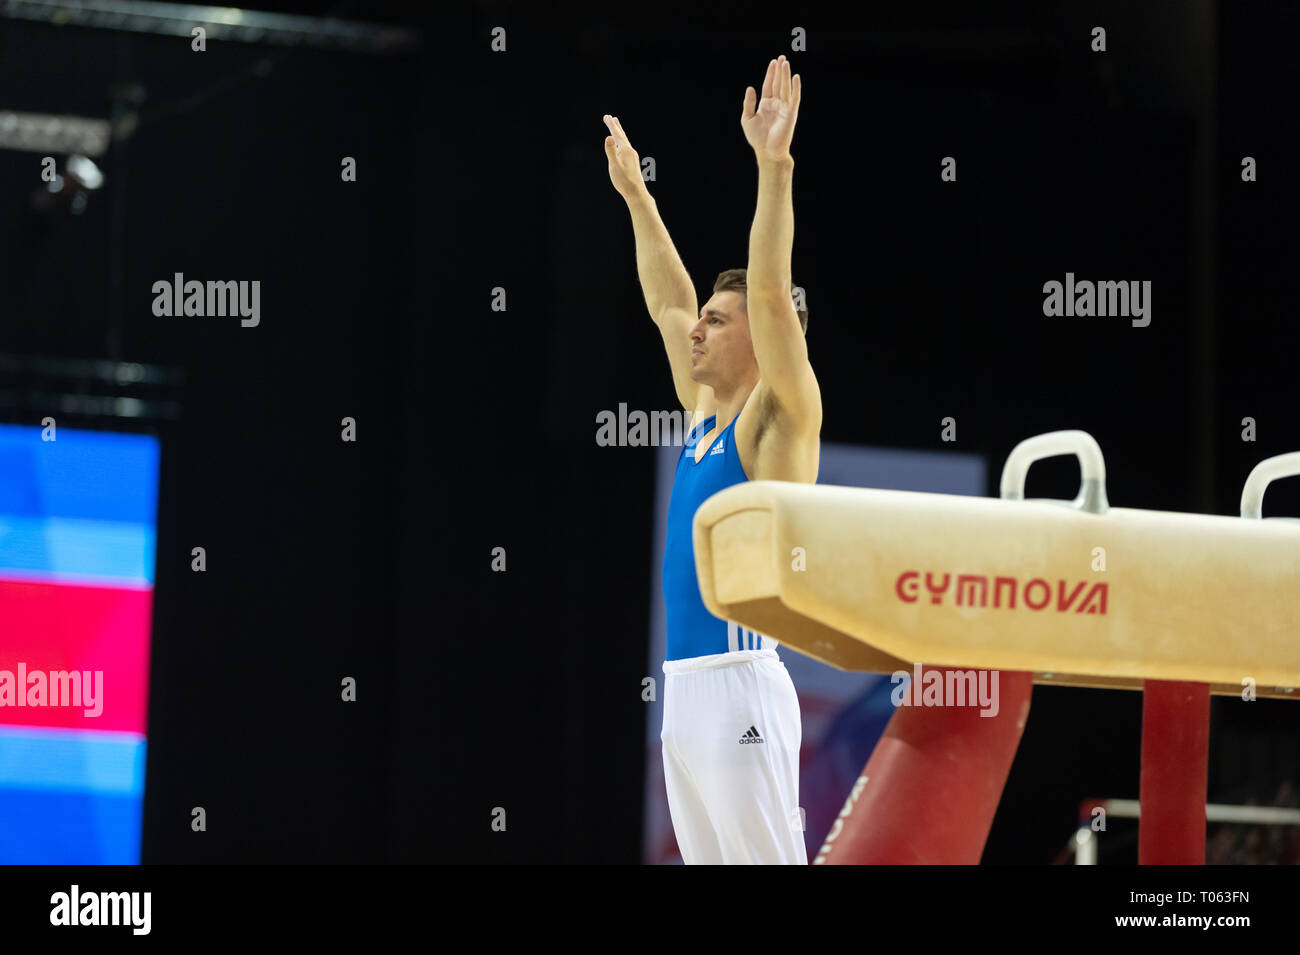 Liverpool, UK. 17th March 2019. Pommel Horse Gold medalist Max Whitlock, MBE of South Essex Gymnastics competing at the Men’s and Women’s Artistic British Championships 2019, M&S Bank Arena, Liverpool, UK. Credit: Iain Scott Photography/Alamy Live News Stock Photo